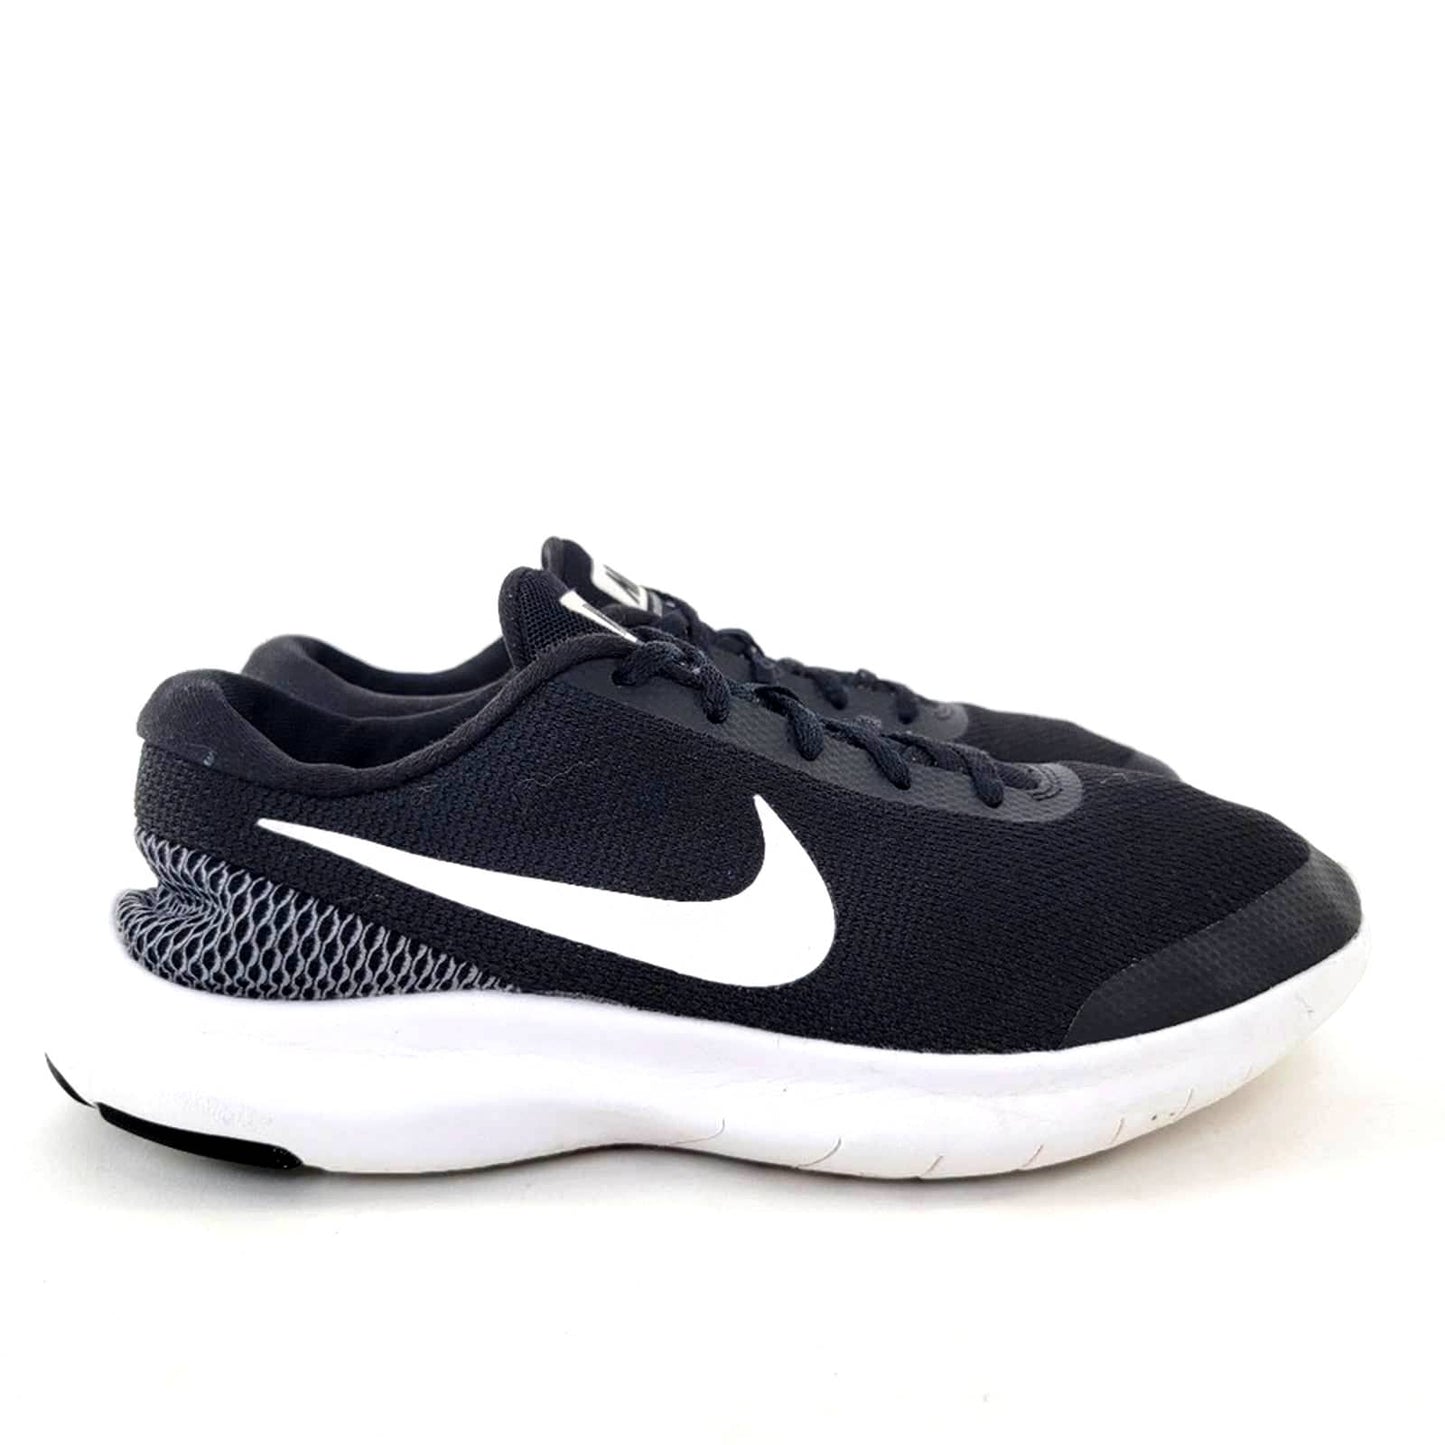 Nike Flex Experience RN 7 Running Shoes - 10